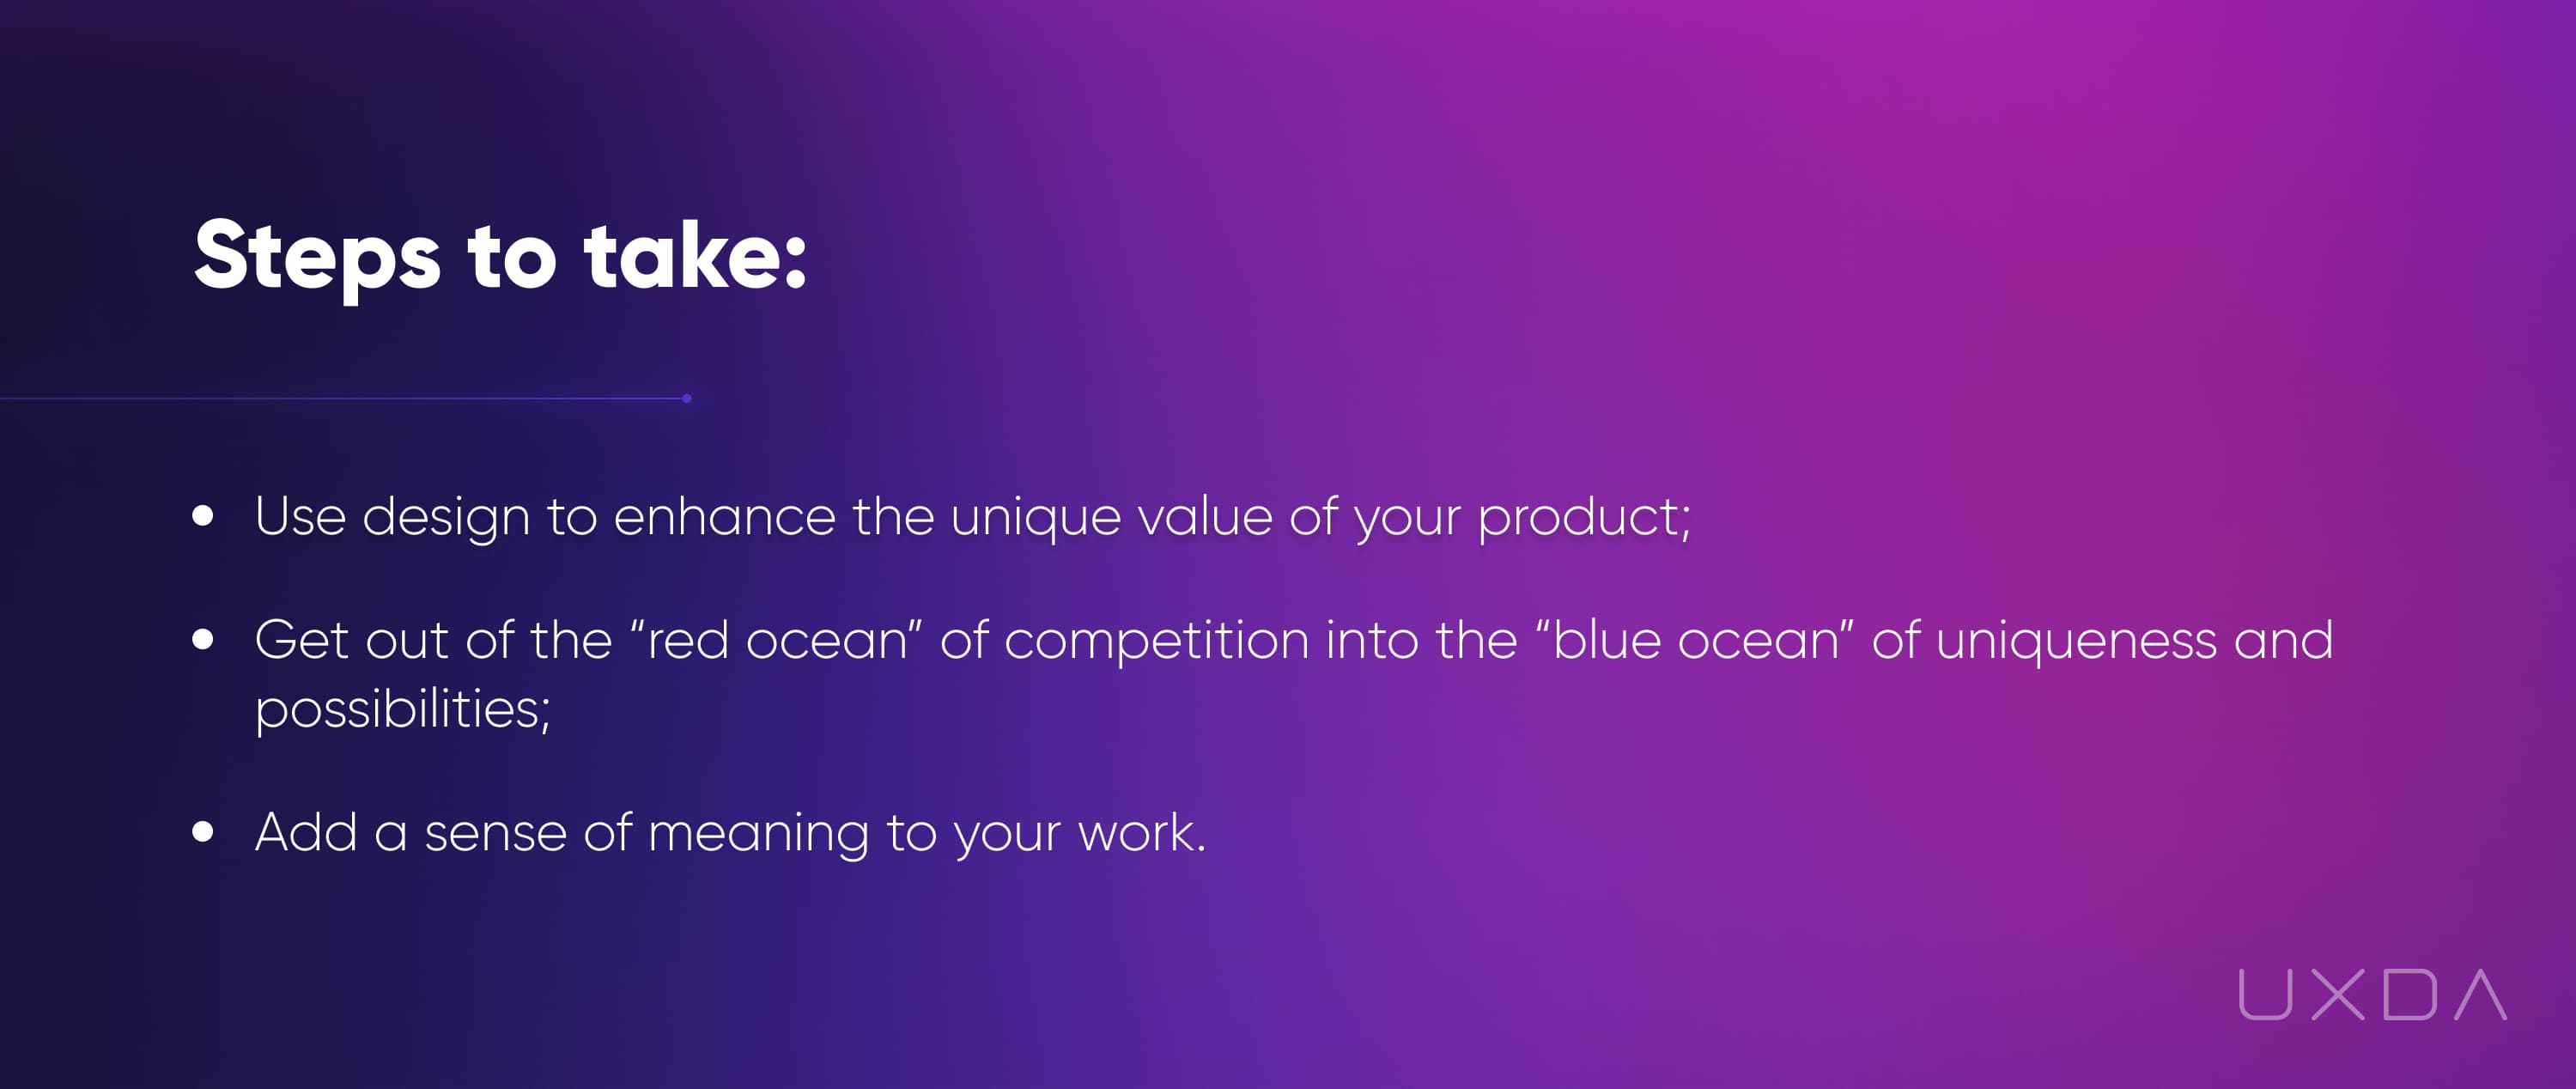 Financial UX Methodology Design Pyramid Product steps to take red ocean